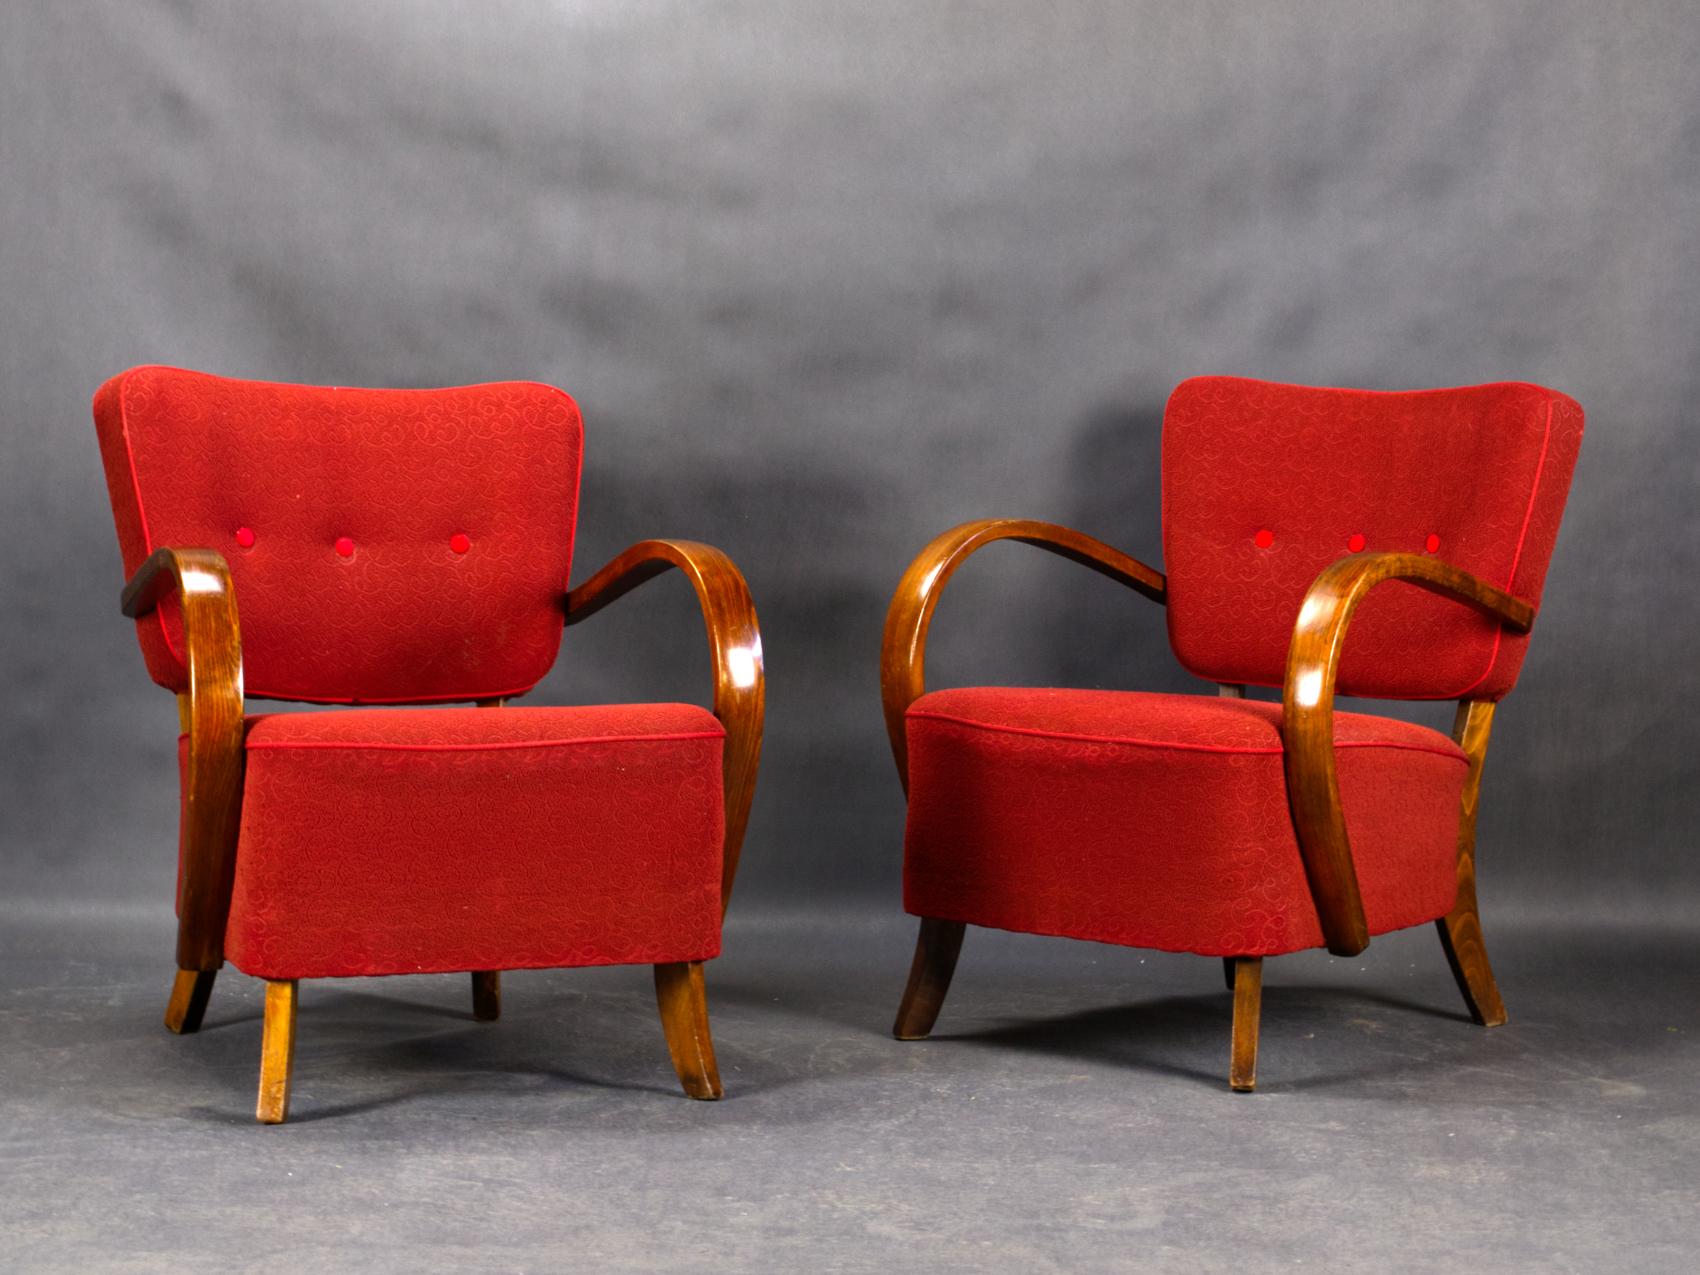 These armchairs, model H 237 were designed by Jindrich Halabala and produced in Czechoslovakia from the 1930s by UP Zavody Brno.
The chairs are in good vintage condition.